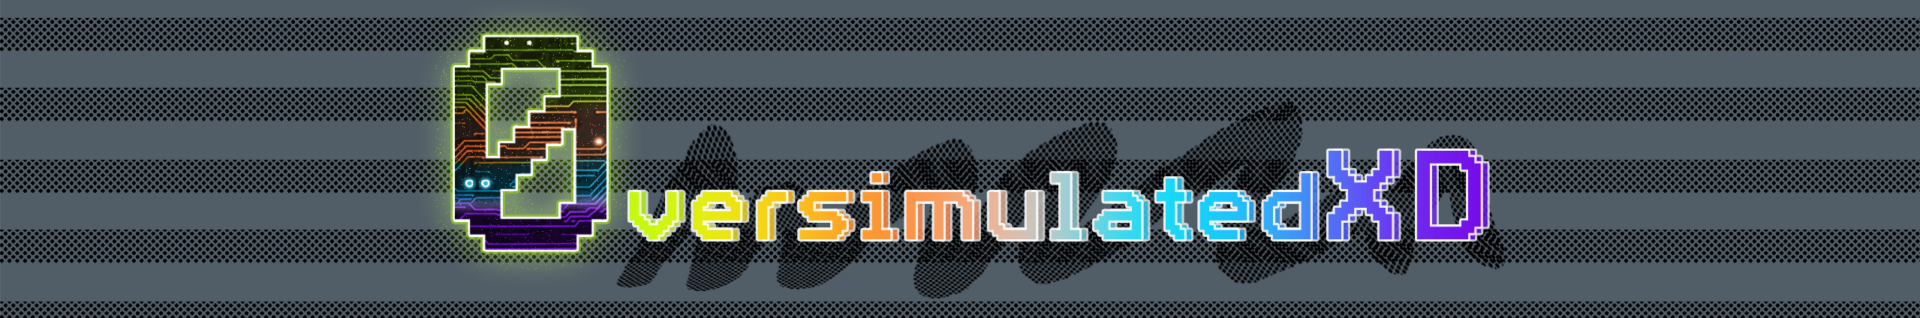 A dark grey and black striped banner with a multi-colored text overlay that says "0versimulatedXD"